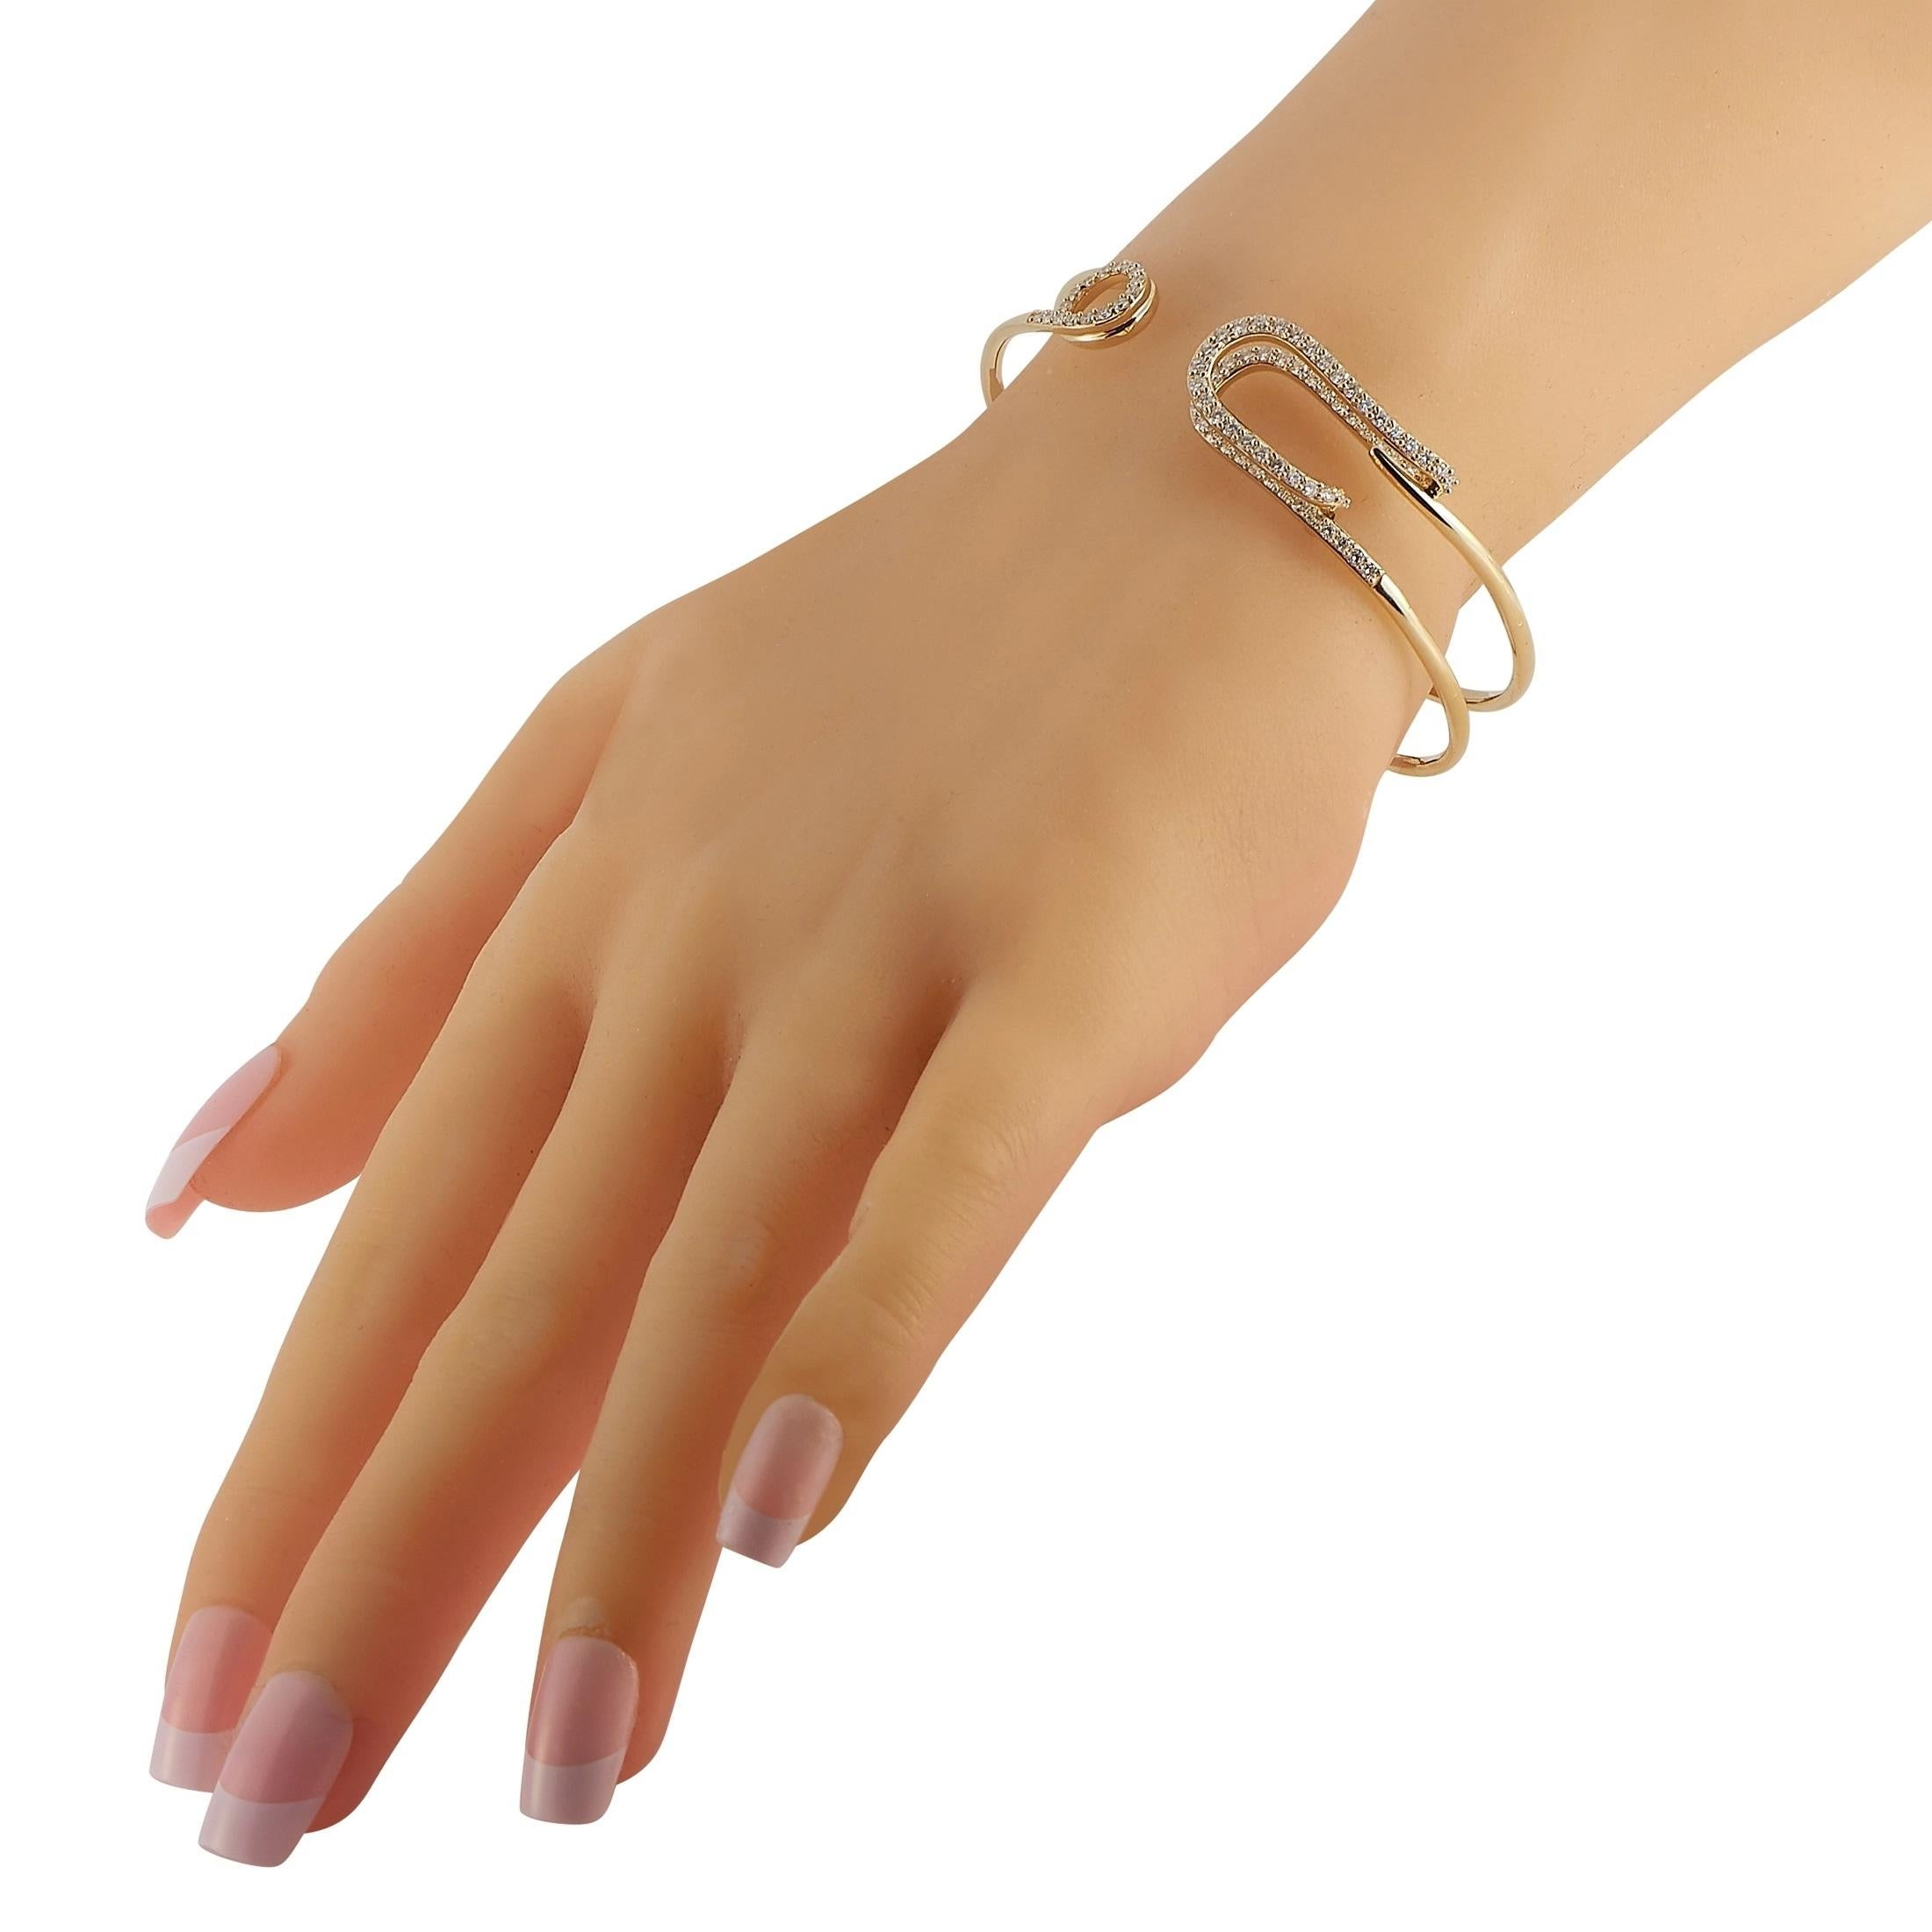 Add charm to any outfit with this fun, fabulous bracelet. An 18K Yellow Gold setting resembles a safety pin, which adds a unique sense of charm. It measures 7.5” long and comes complete with inset diamonds totaling 1.52 carats. 
 
 This jewelry